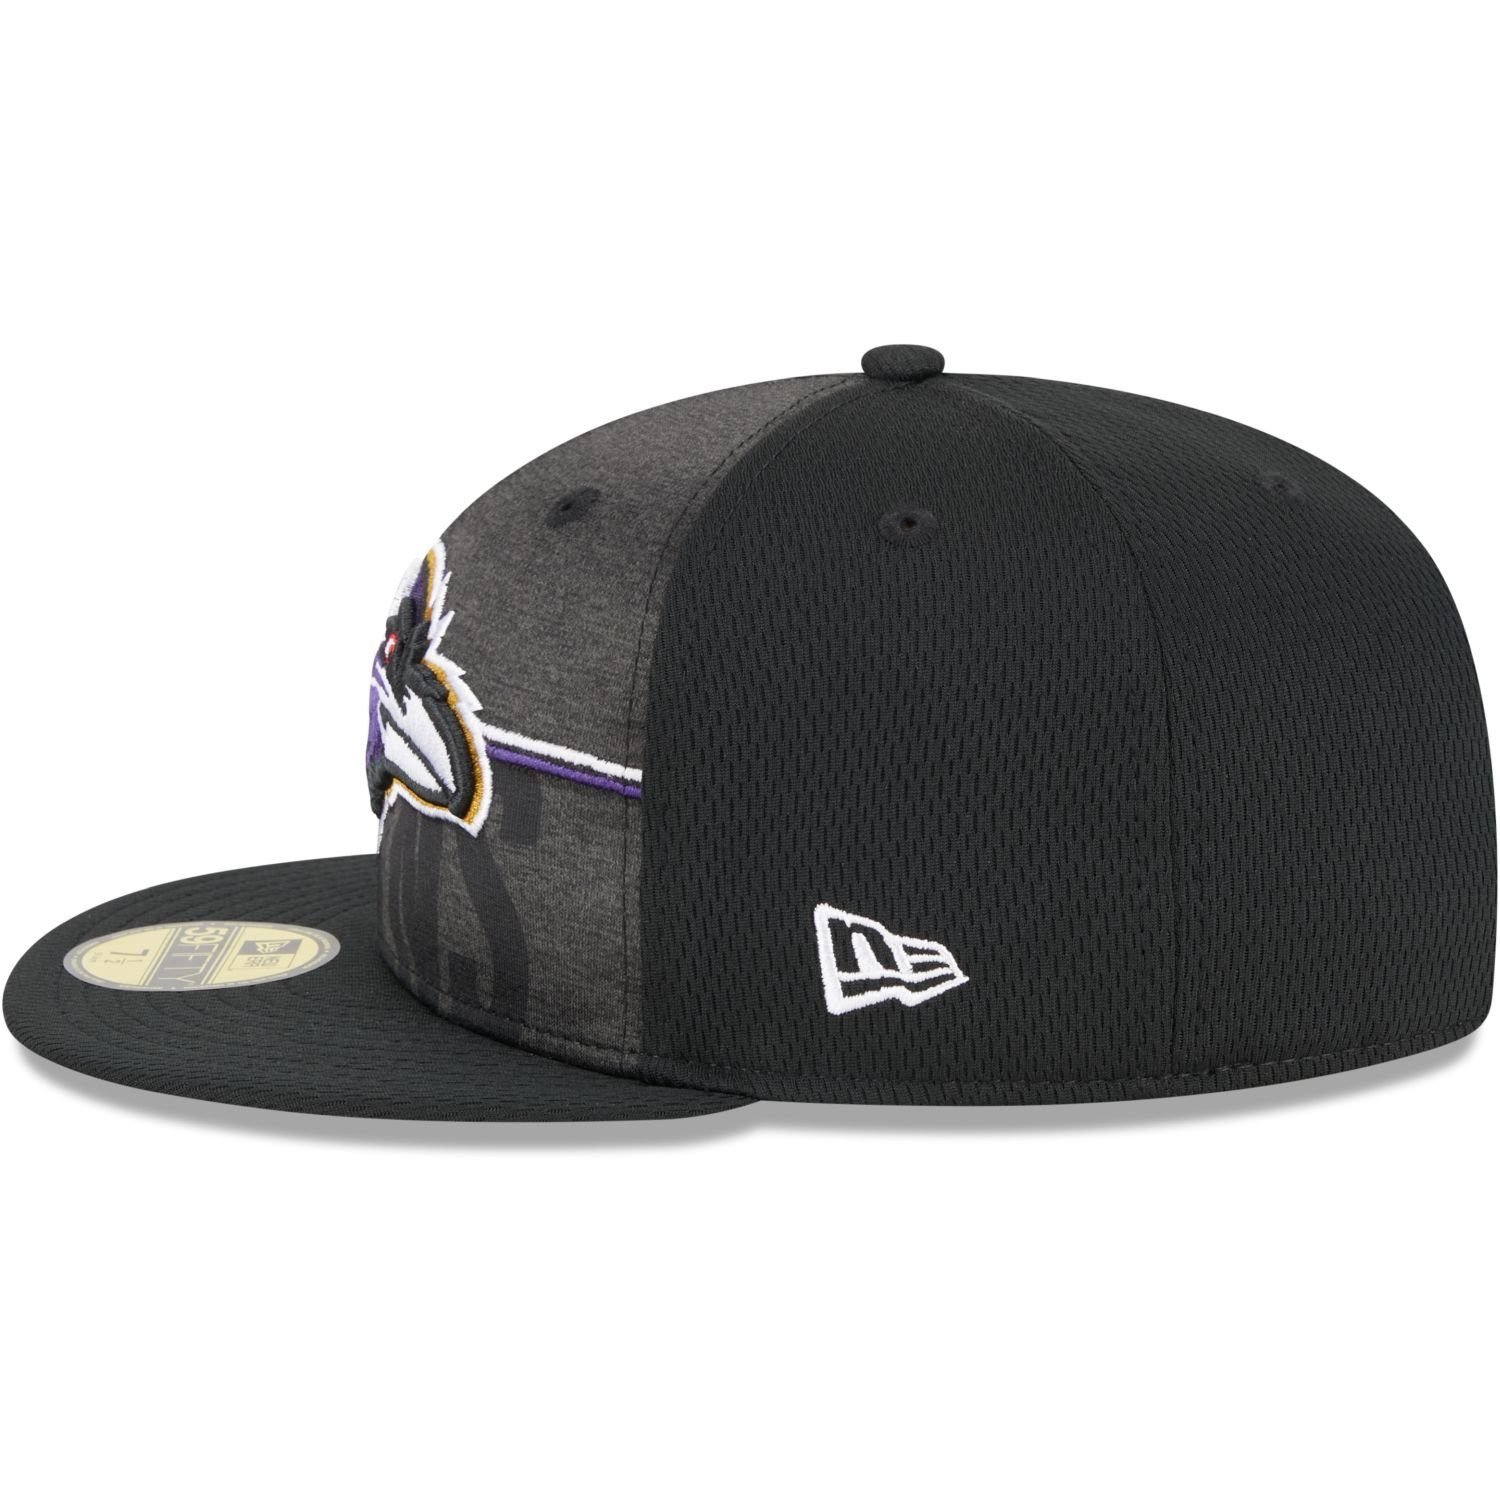 New Era Fitted NFL TRAINING Ravens Cap 59Fifty Baltimore